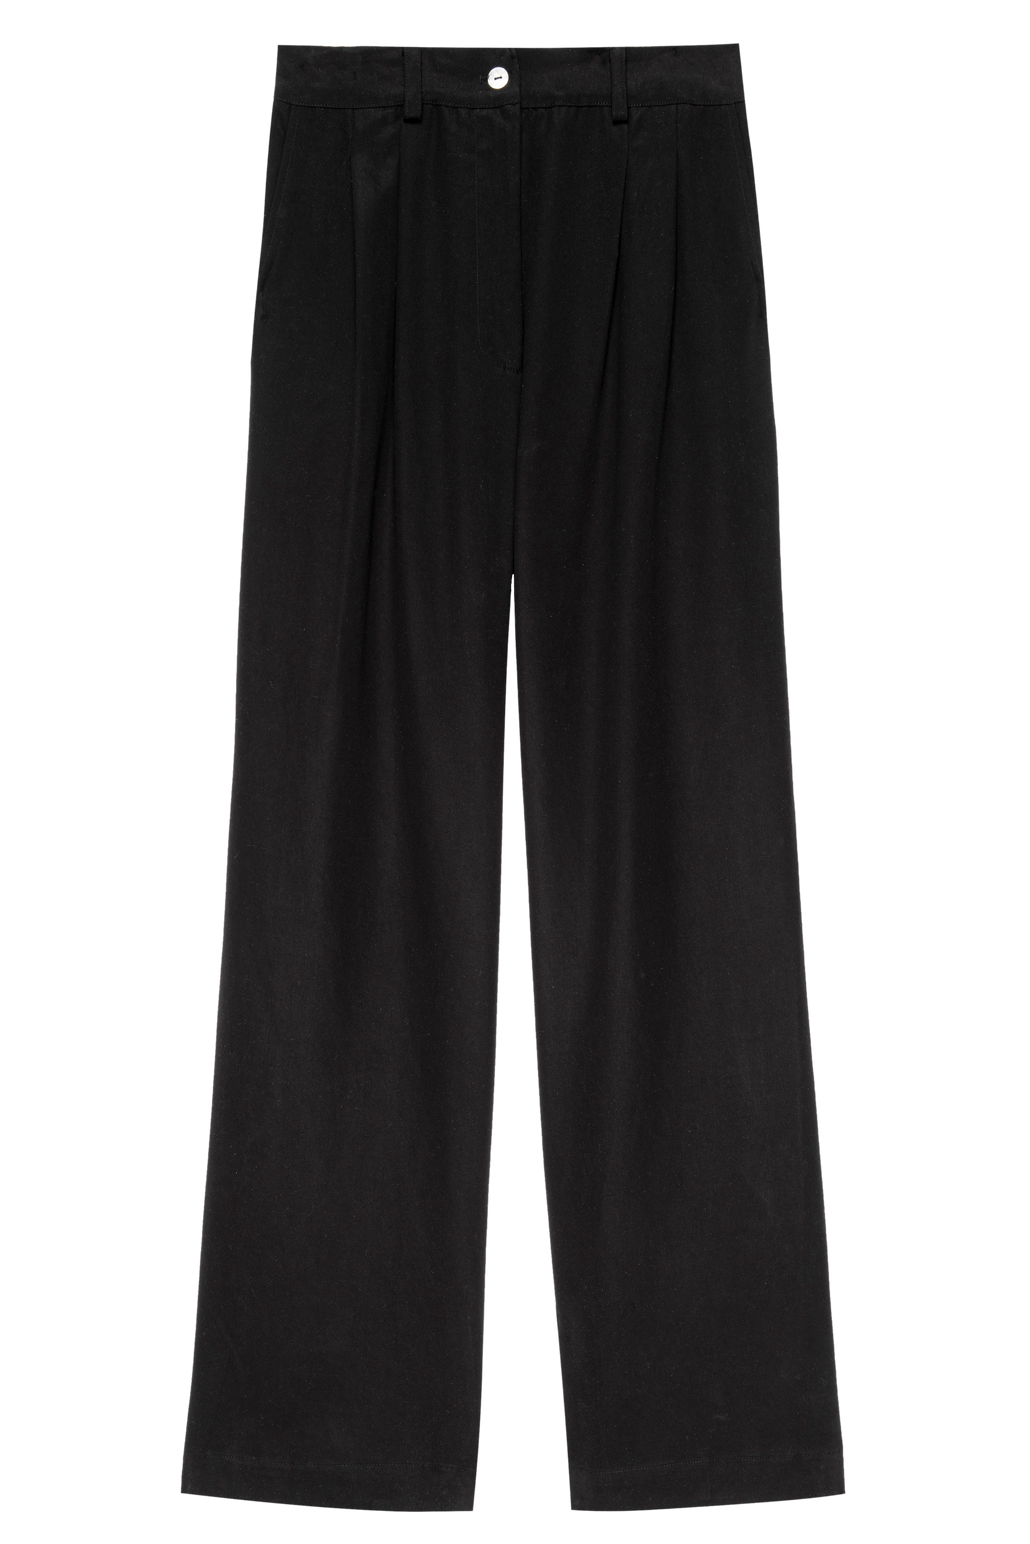 The Pleated Trouser